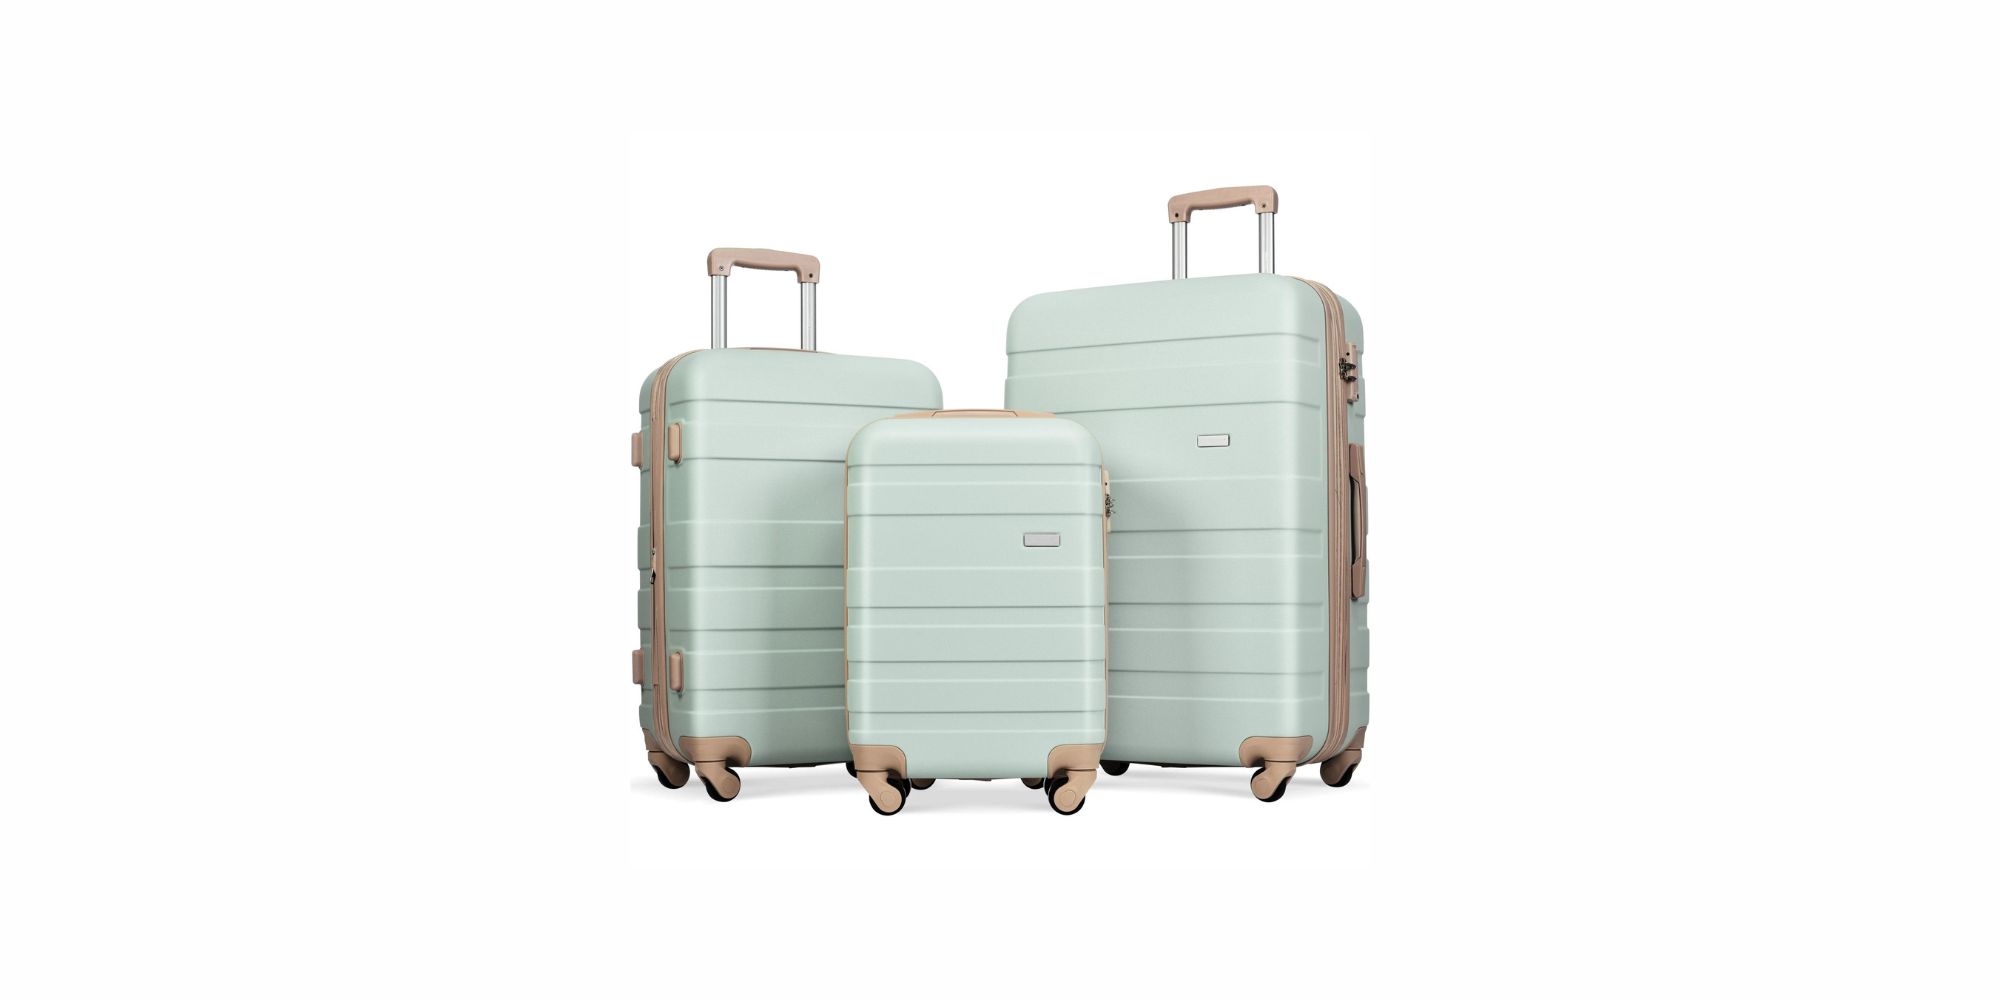 Steve Madden Designer Luggage Collection - 3 Piece Softside Expandable  Lightweight Spinner Suitcase Set - Travel Set includes 20 Inch Carry on, 24